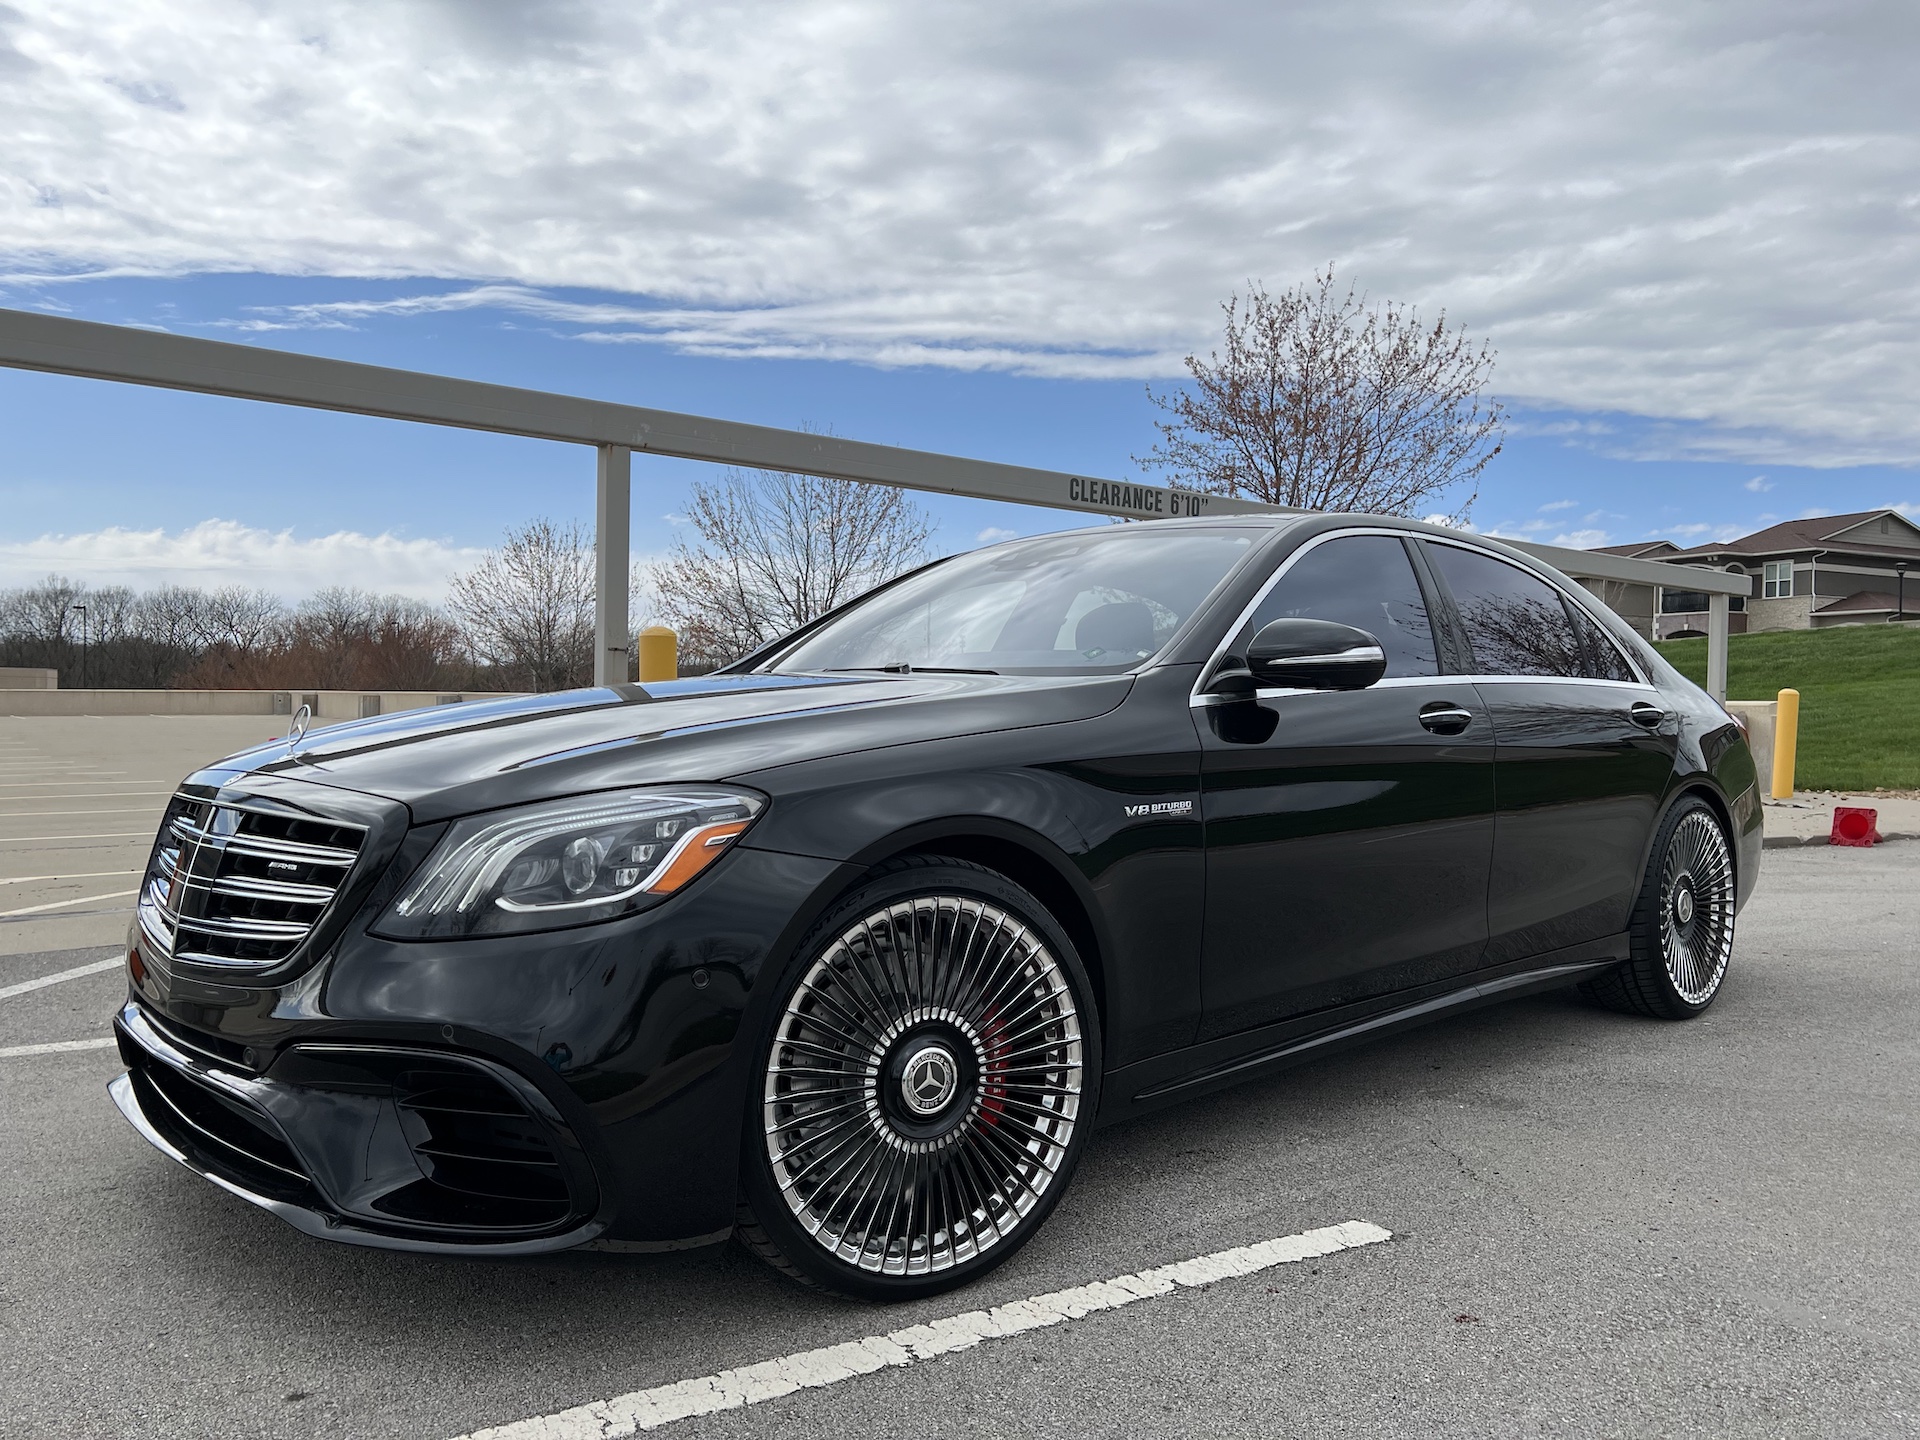  Mercedes-Benz S63 AMG with AG Luxury AGL45